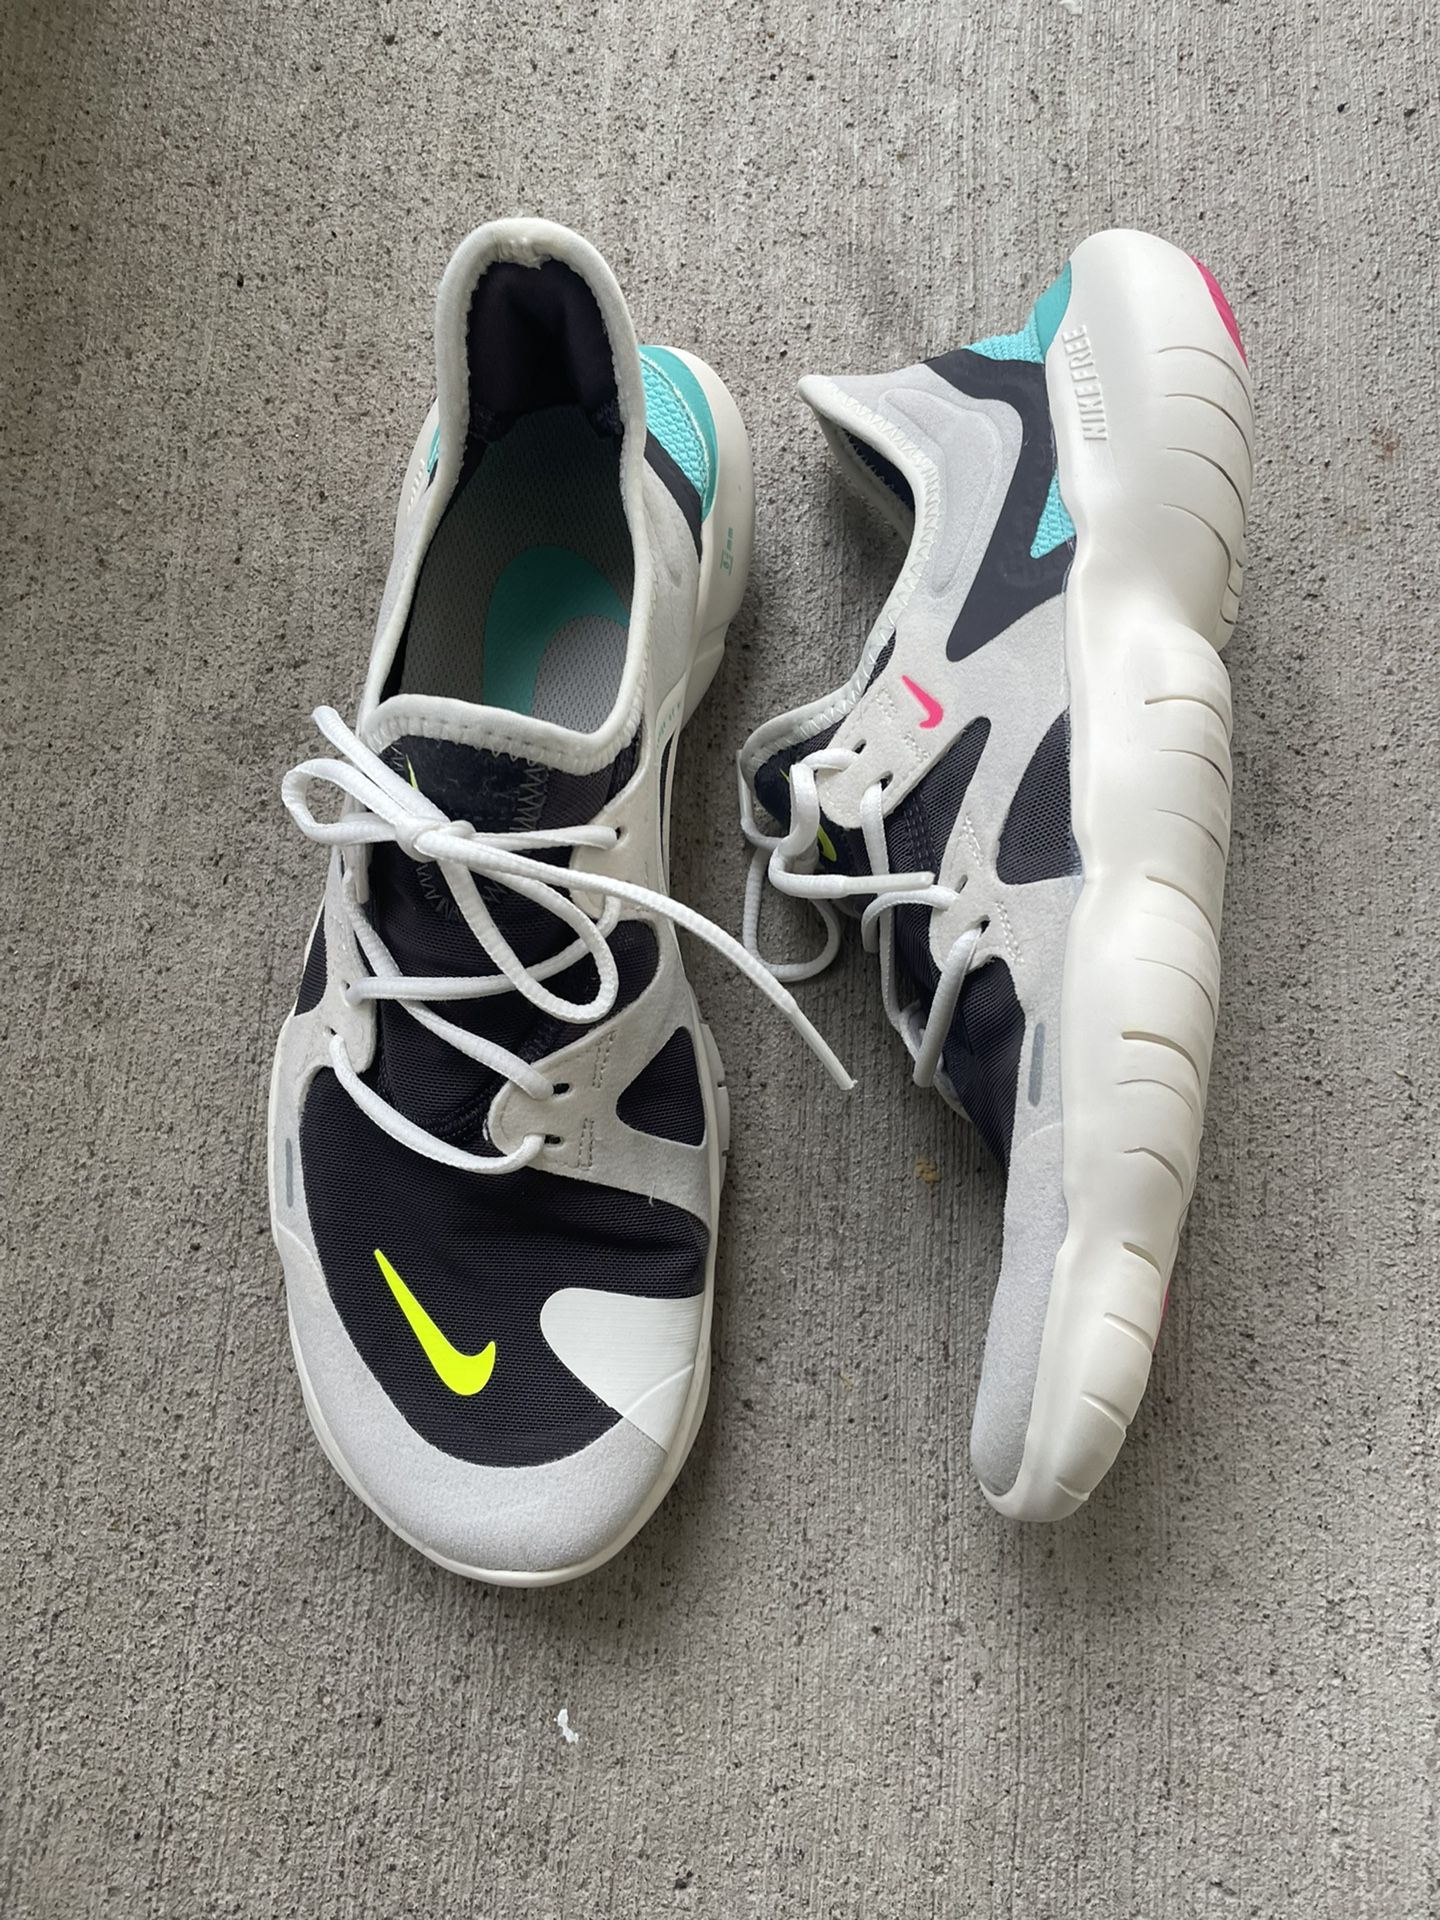 Nike Free RN 5.0 Sail/Volt-Thunder Grey AQ1316-100 Women's for Sale in Vancouver, WA -